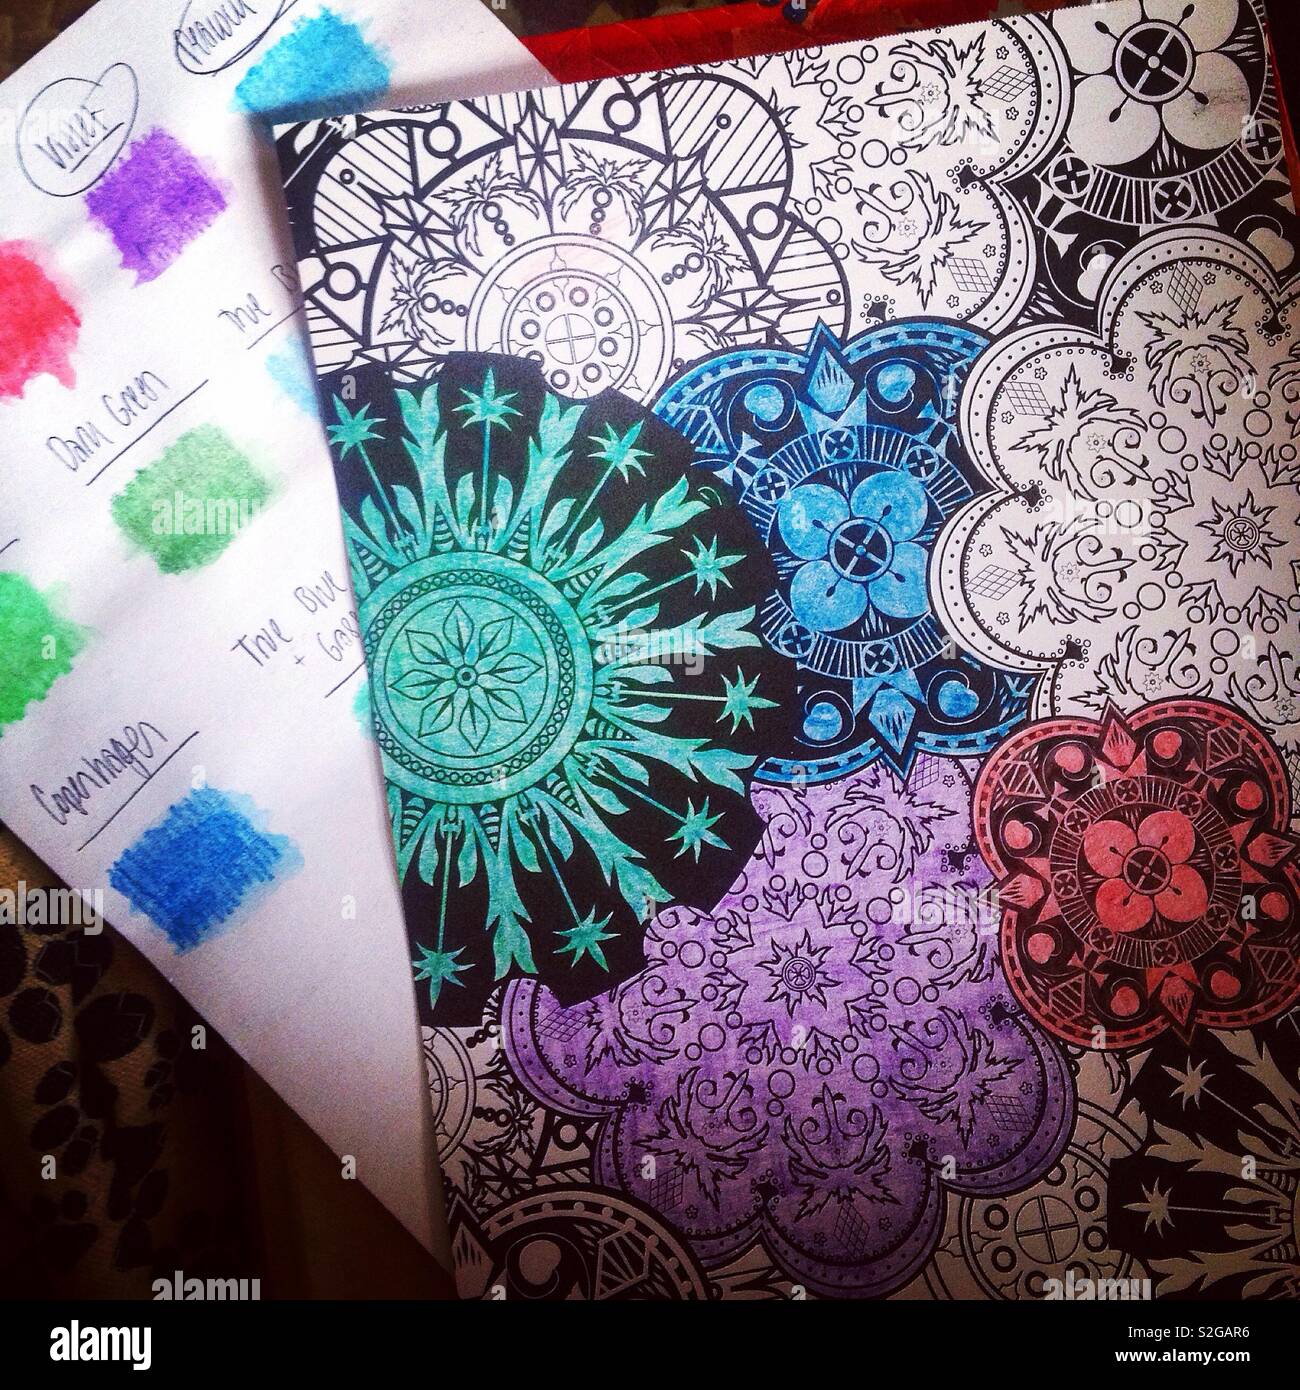 Page of Adult Coloring Work Stock Photo